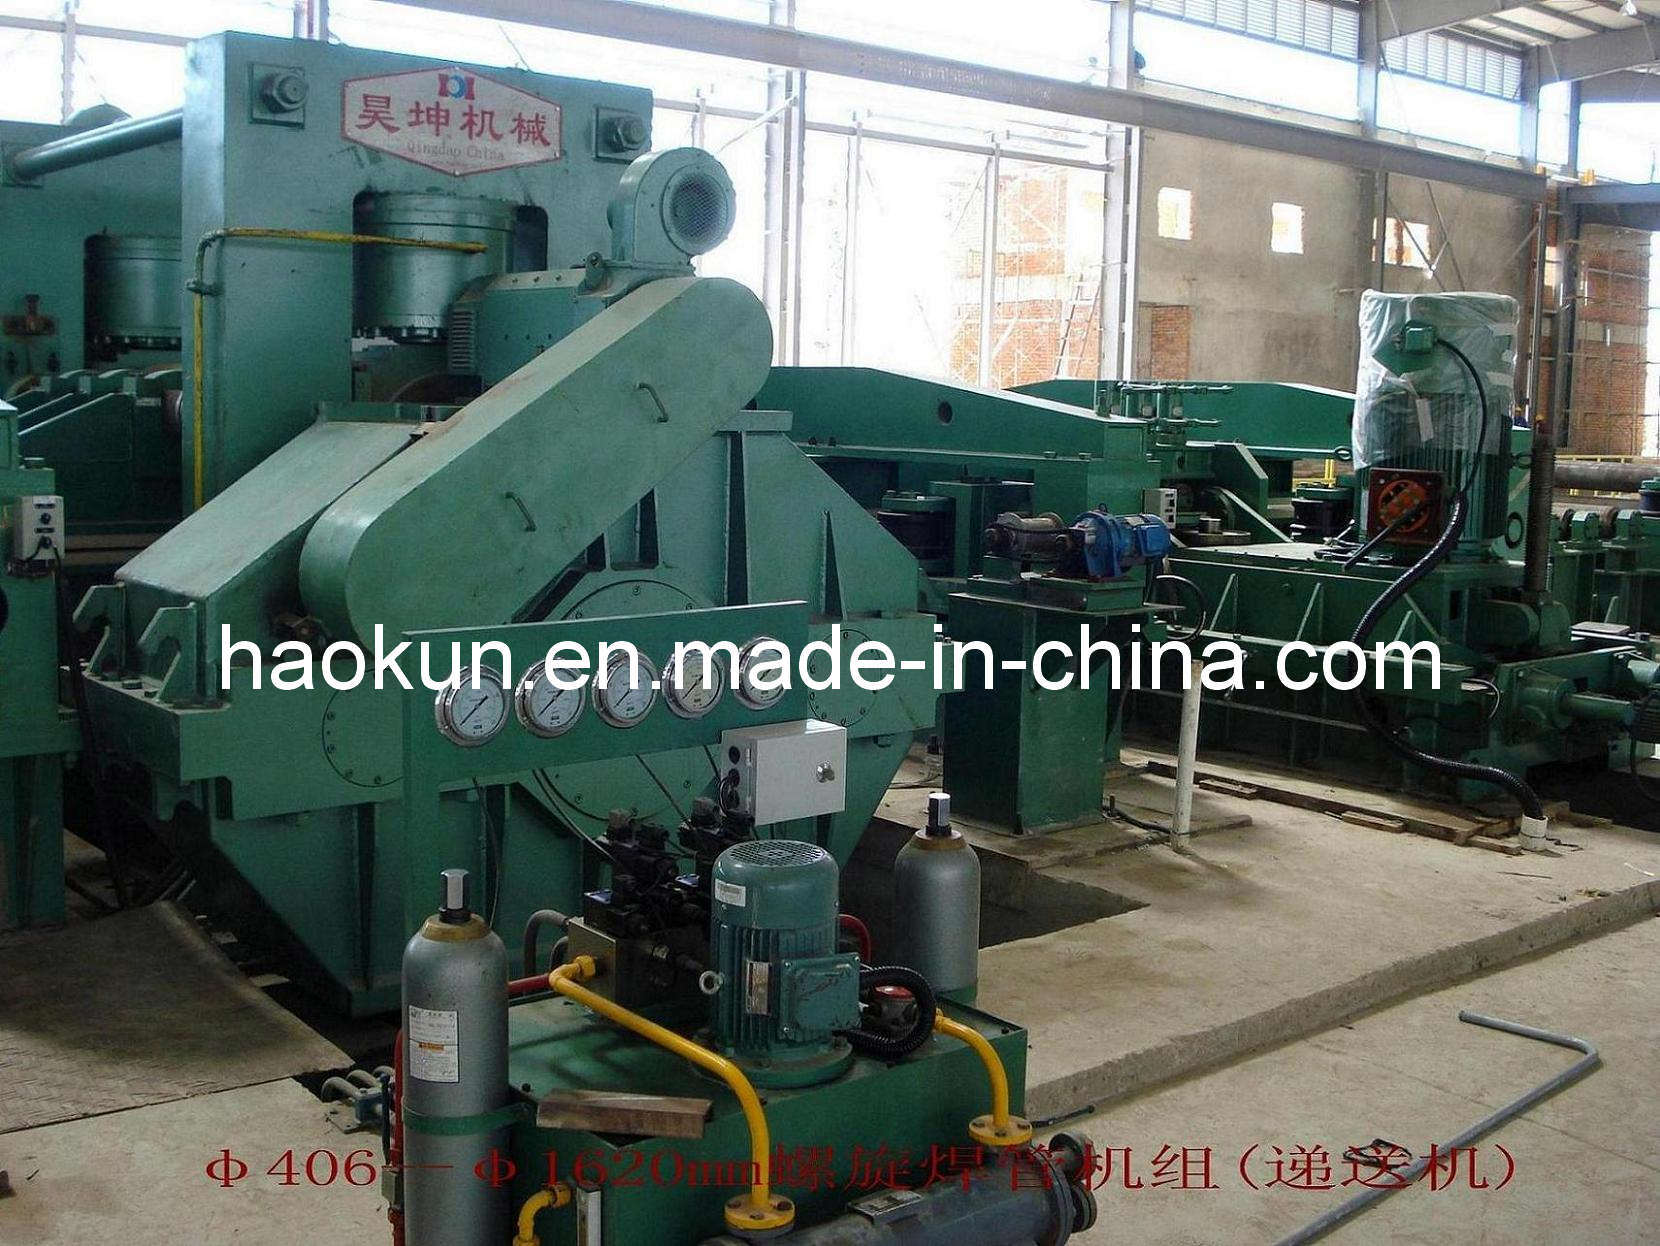 China SSAW Mill-Spiral Welded Pipe Delivery Machine